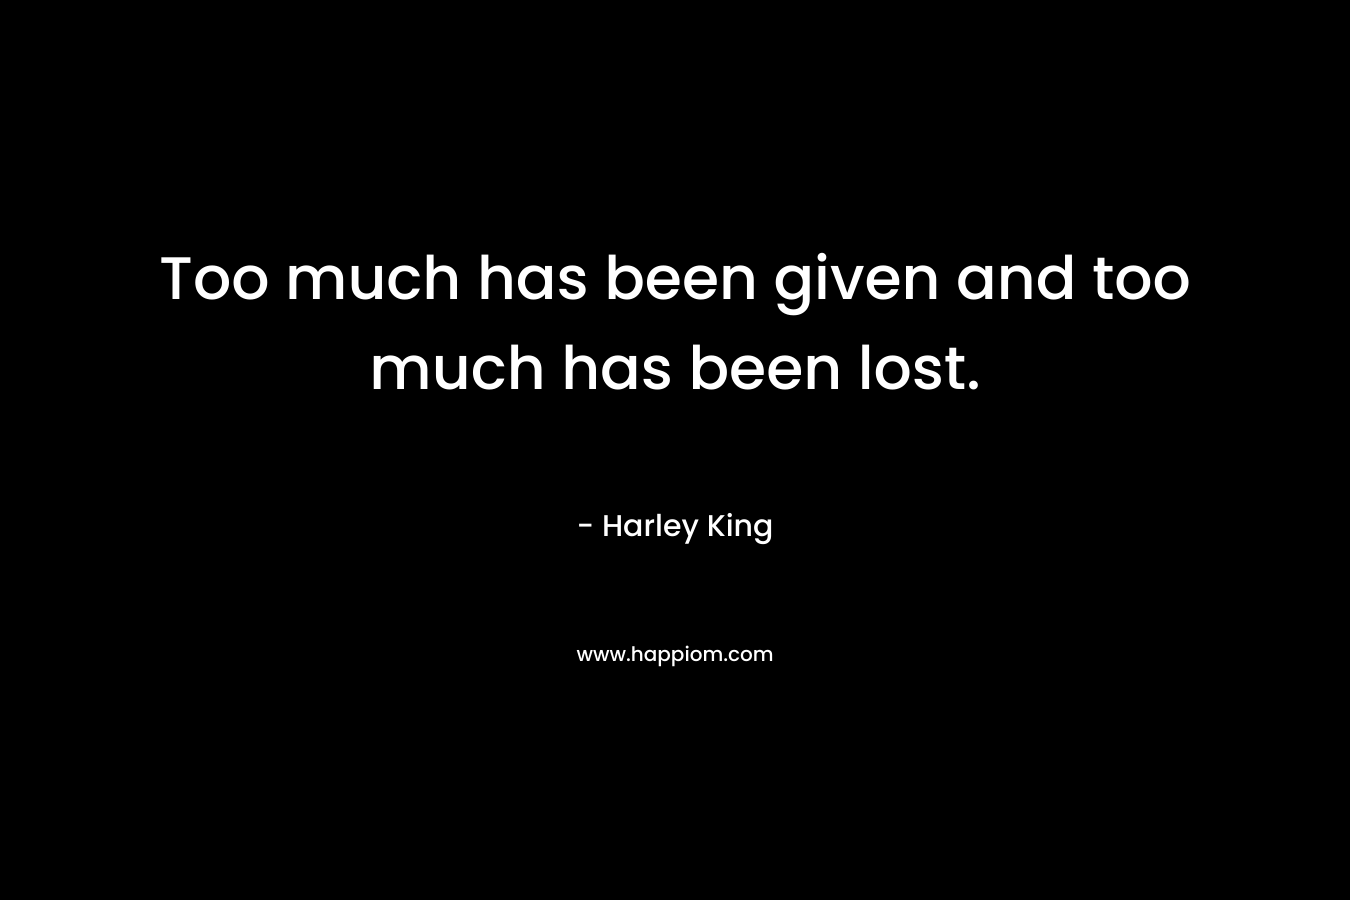 Too much has been given and too much has been lost. – Harley King